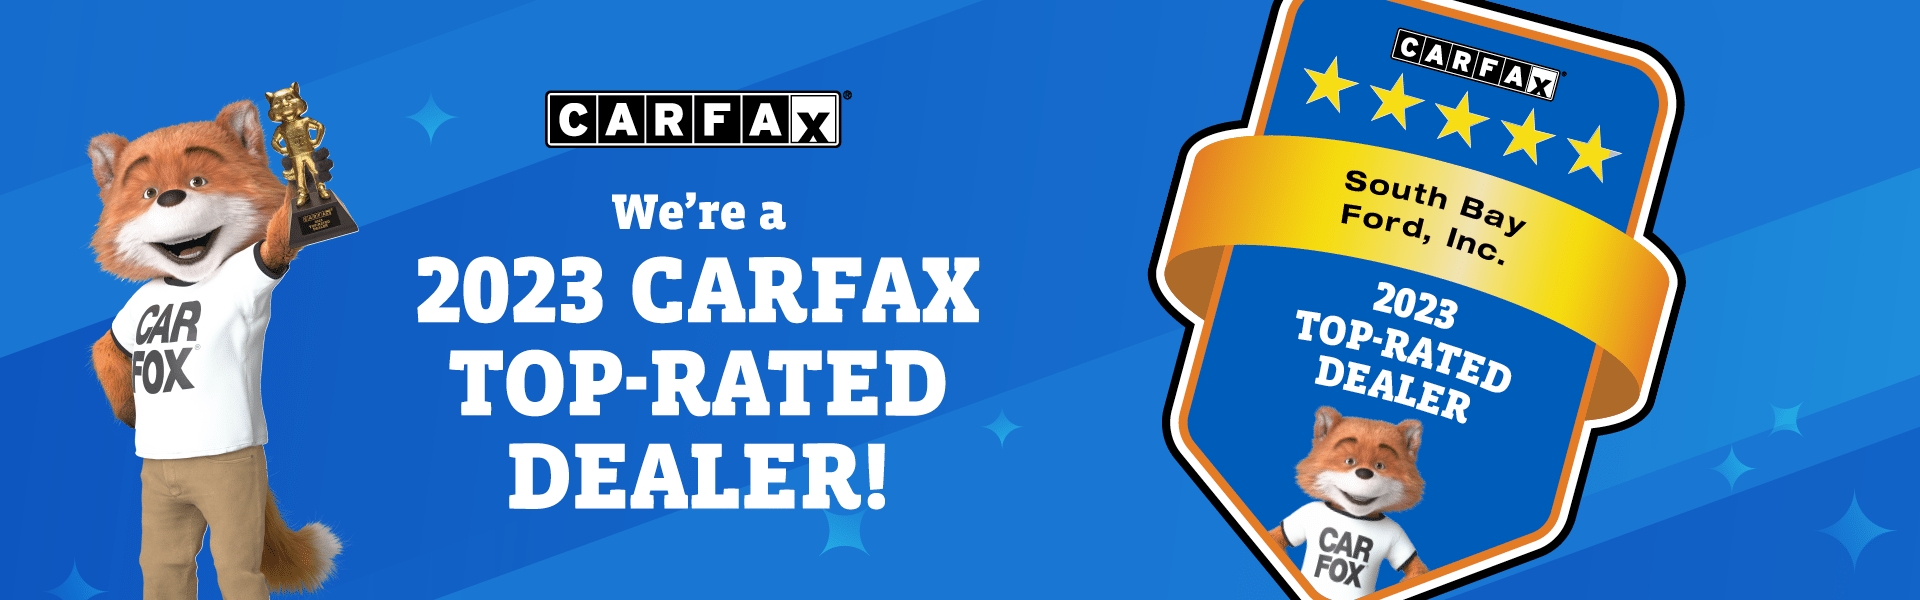 South Bay Ford is a Top CARFAX Rated Dealer